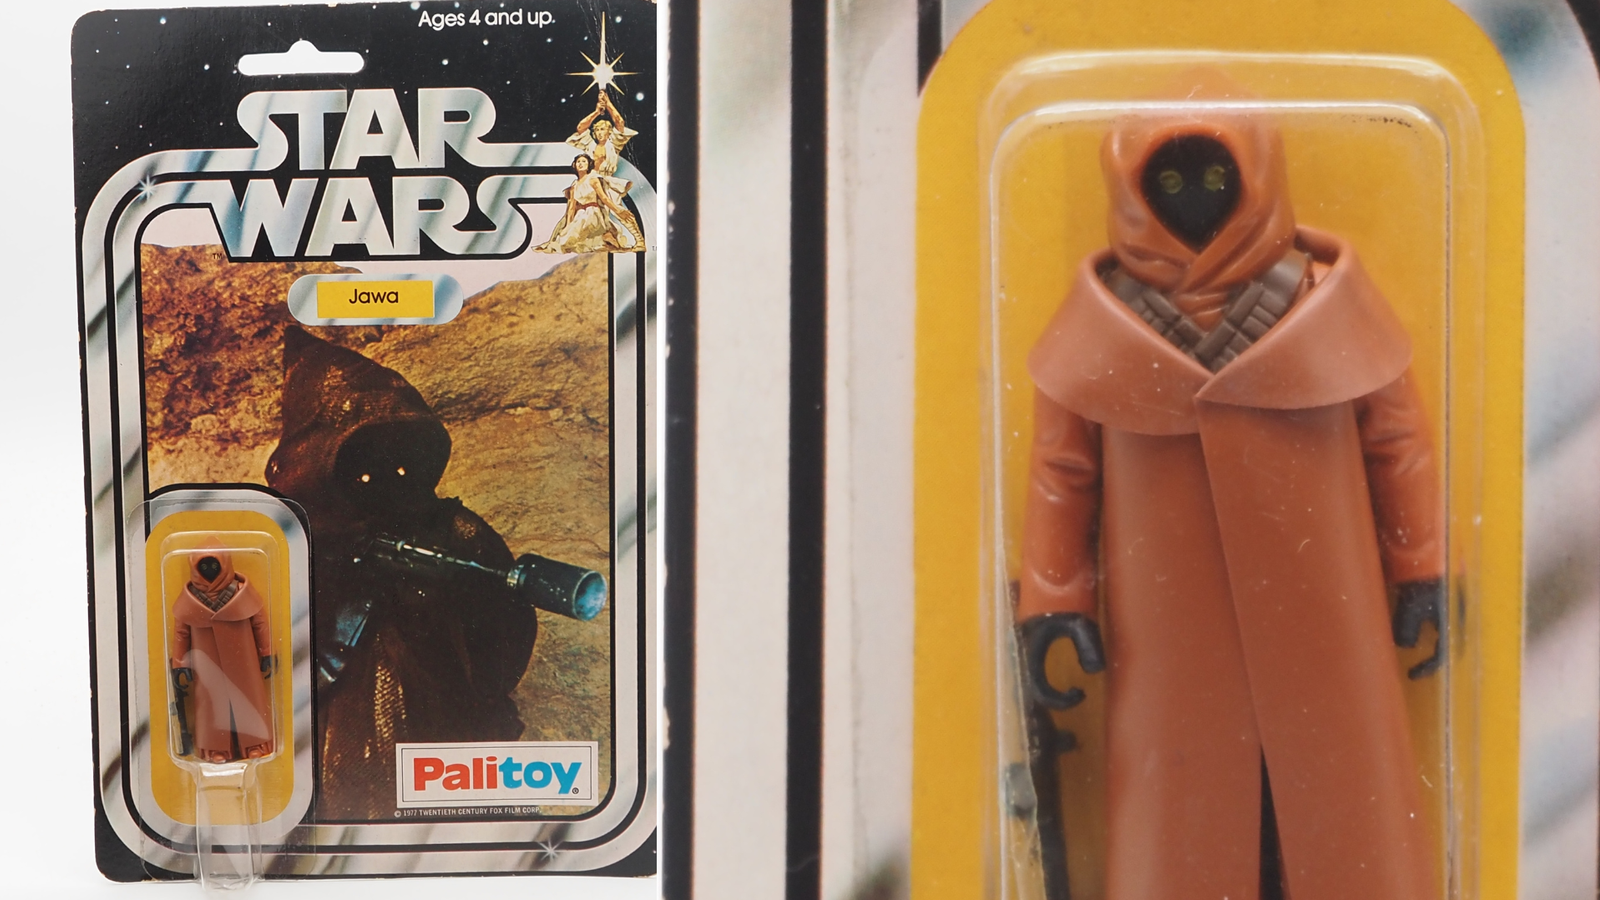 Extremely rare Star Wars Jawa figure sells for £21,000 at auction